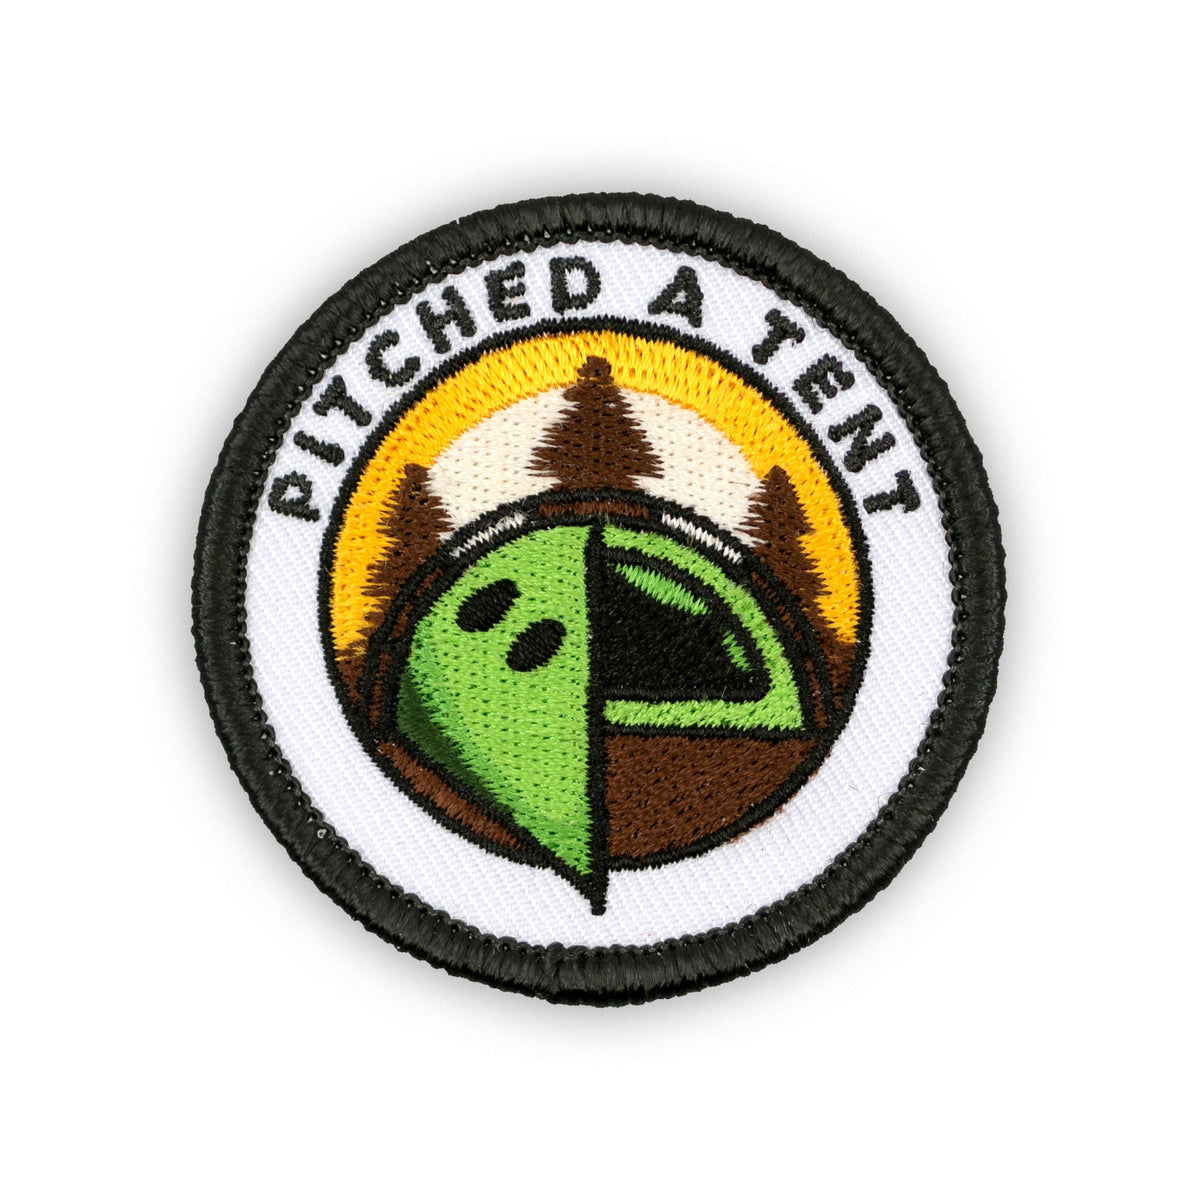 Pitched A Tent adulting merit badge patch for adults